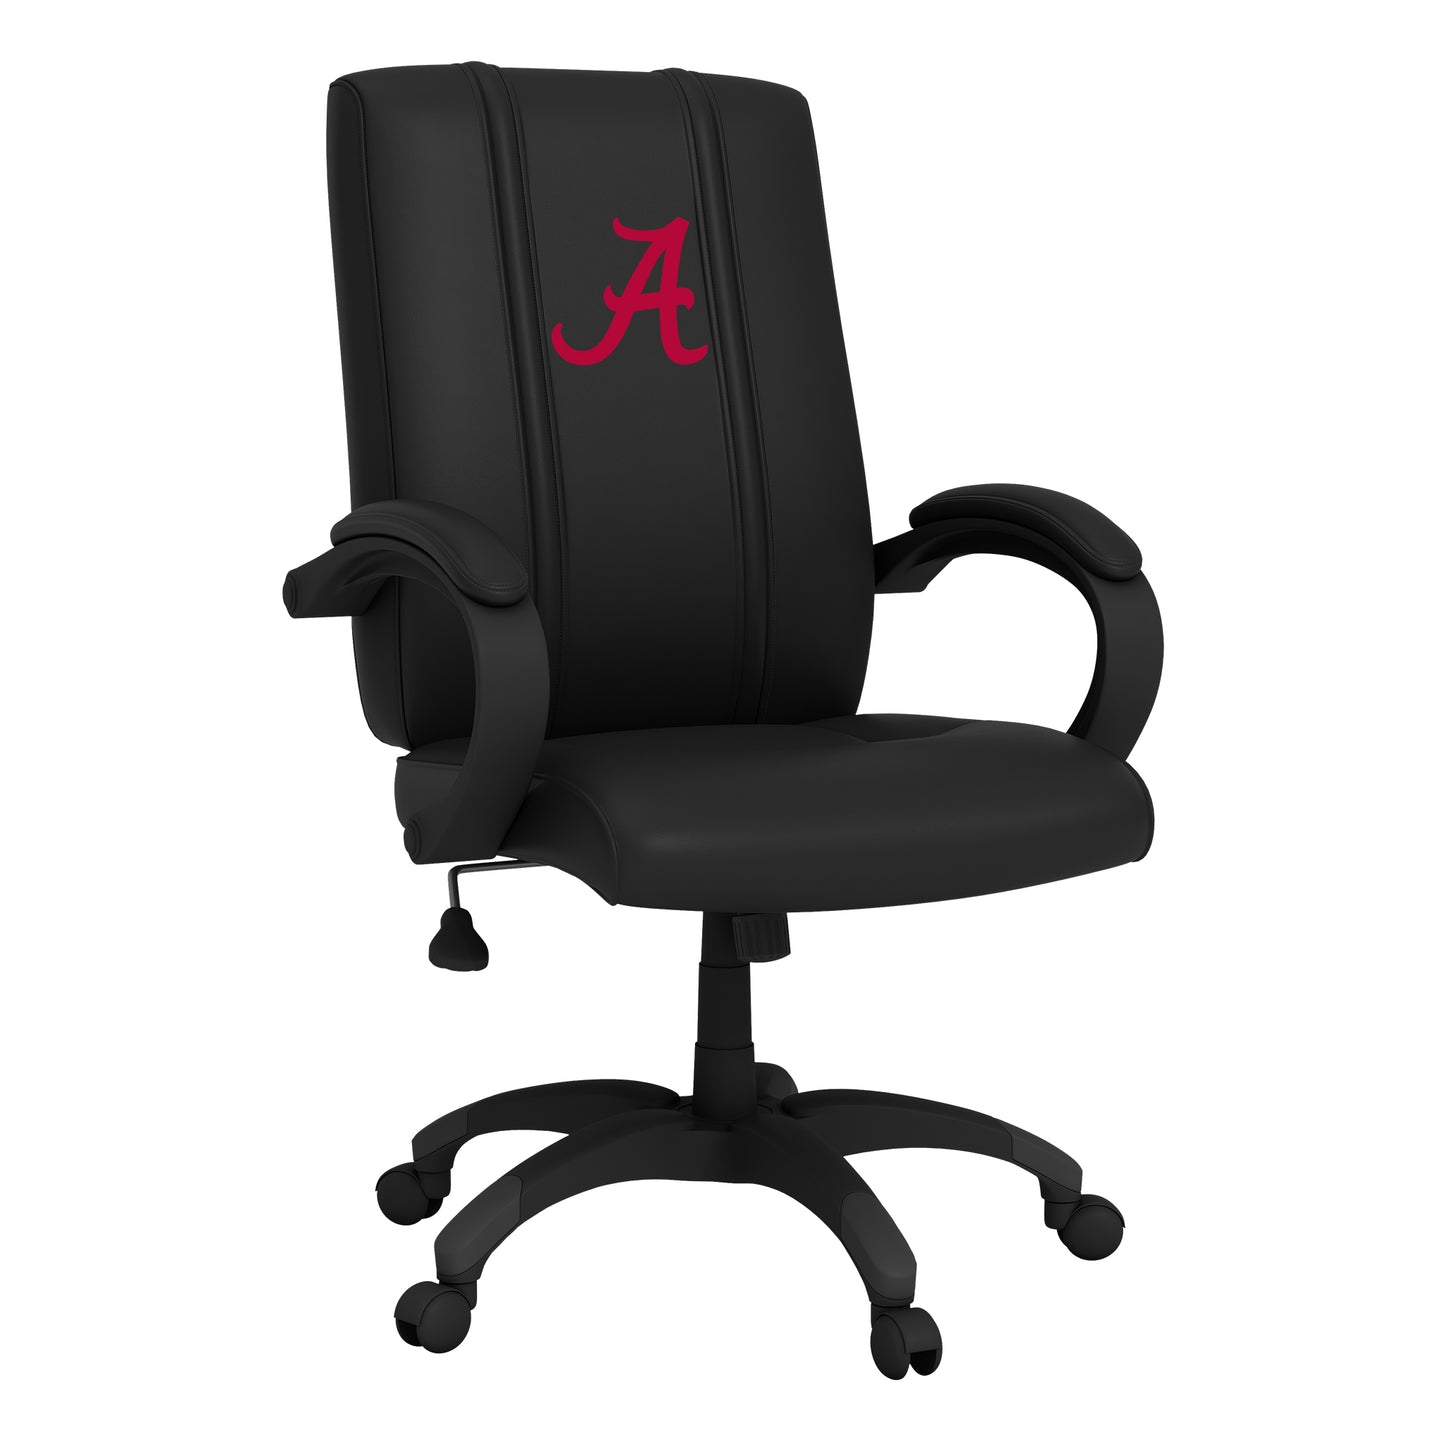 Office Chair 1000 with Alabama Crimson Tide Red A Logo